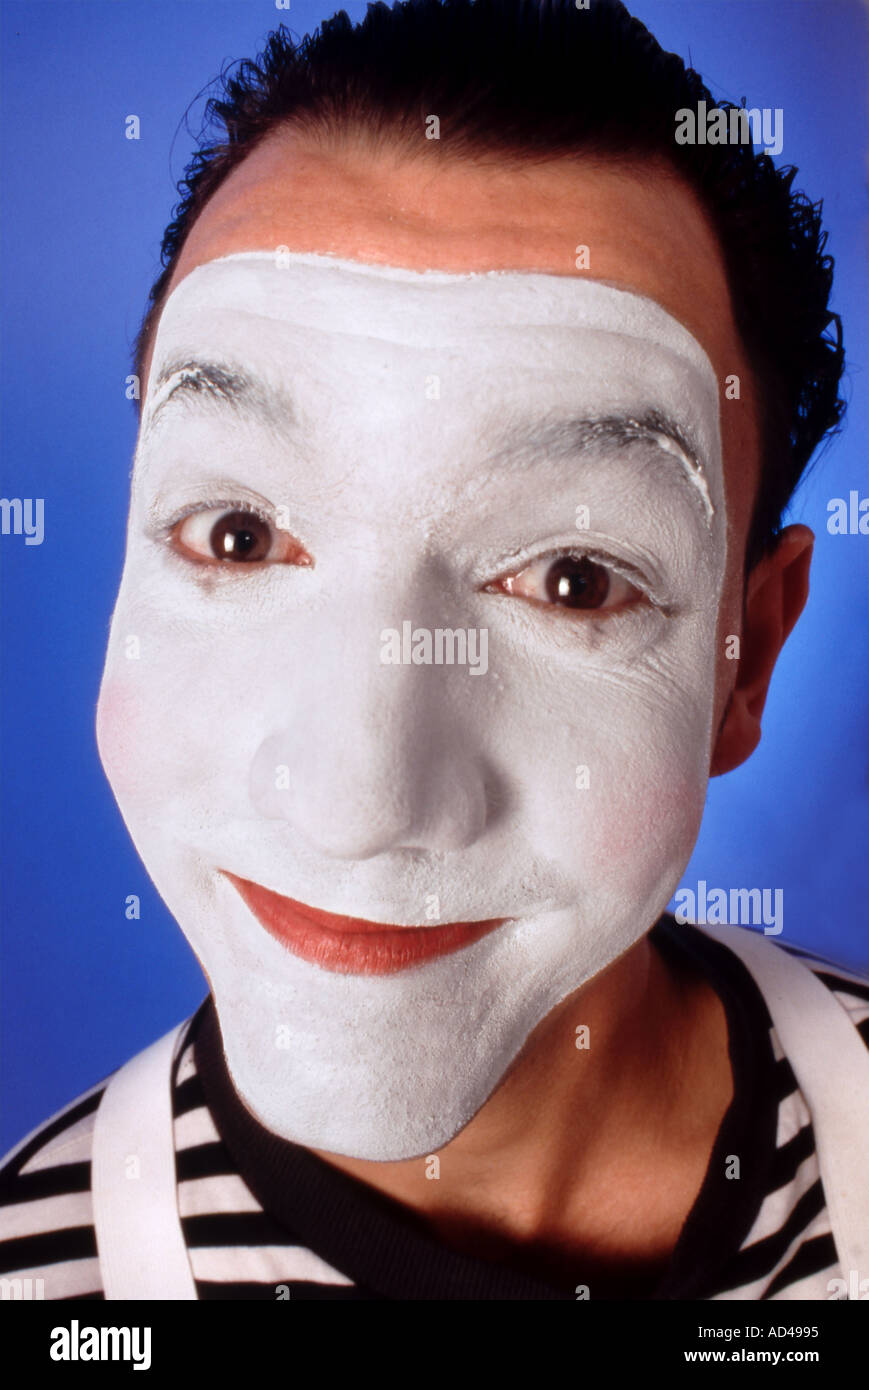 [Image: mime-with-white-painted-face-with-expres...AD4995.jpg]